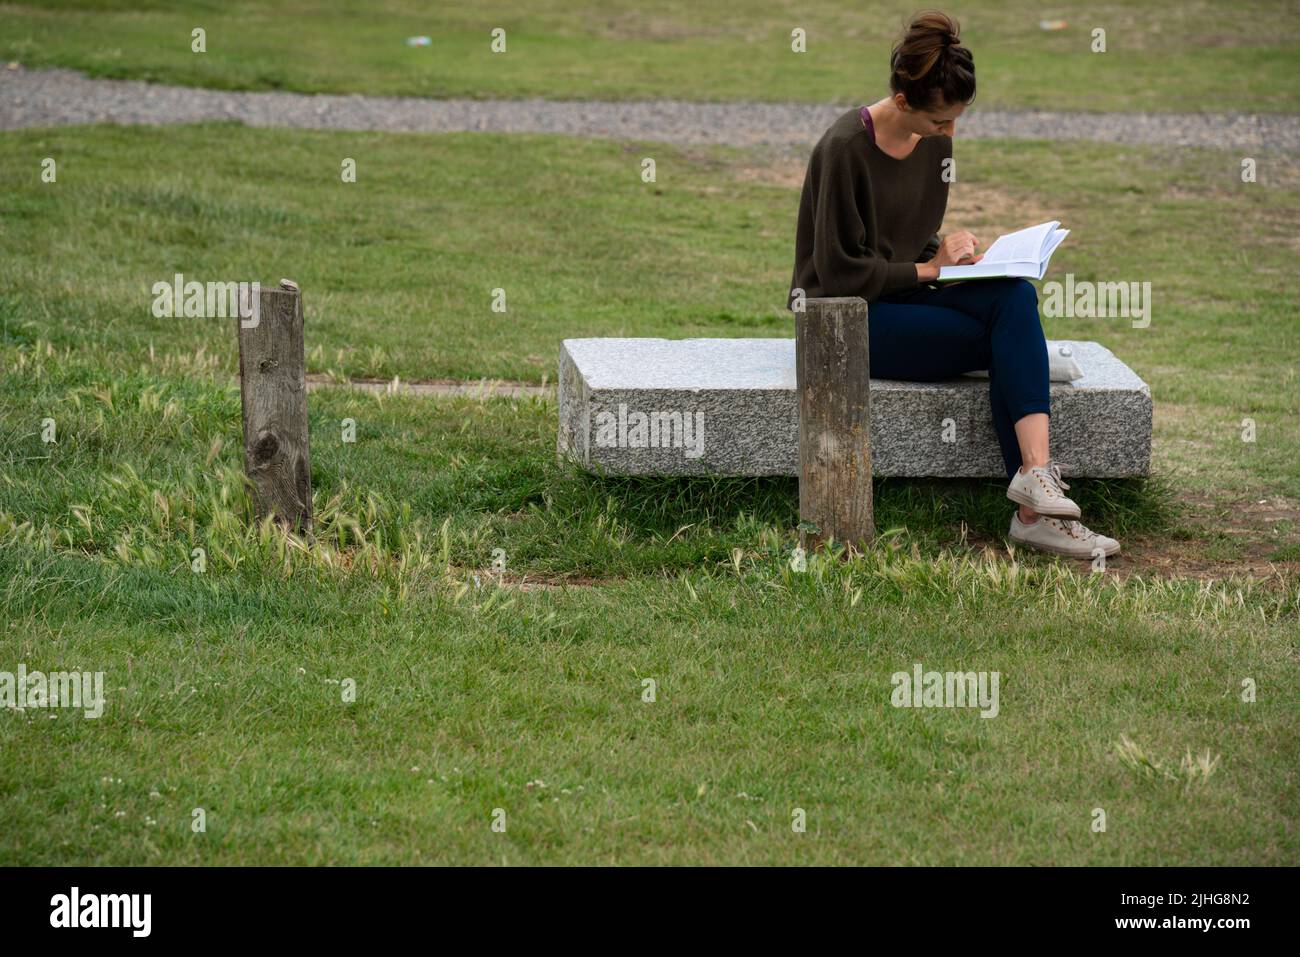 London, UK - June 2020 : Young woman sitting on a concrete slab bench and reading a book on a hot summer day Stock Photo